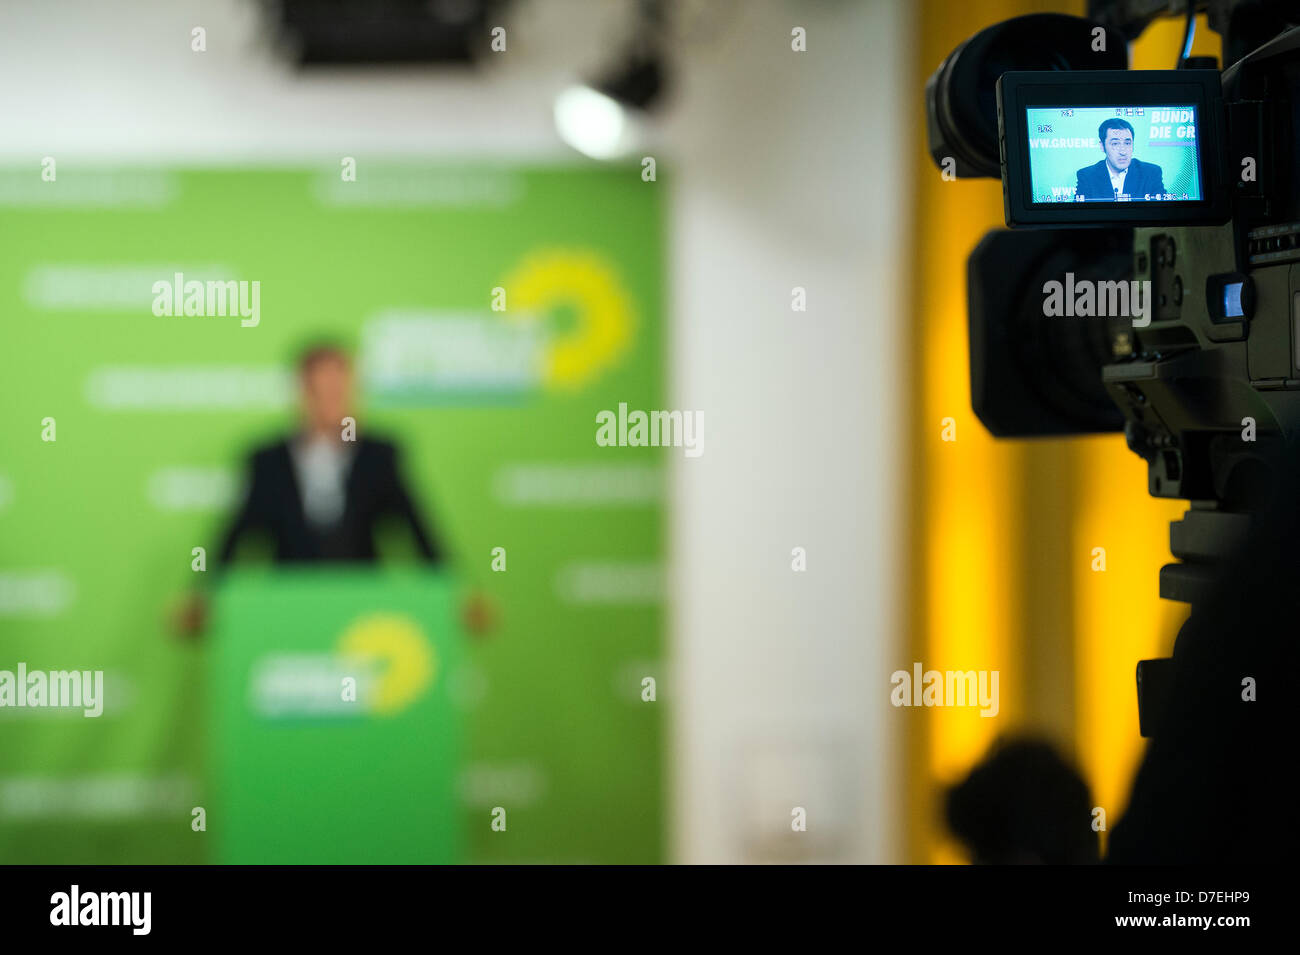 Berlin, Germany. 6th May, 2013. The Chairman of The Greens / Bundnis 90, Cem Özdemir gives a press conference in Berlin. Credit: Credit: Gonçalo Silva/Alamy Live News. Stock Photo